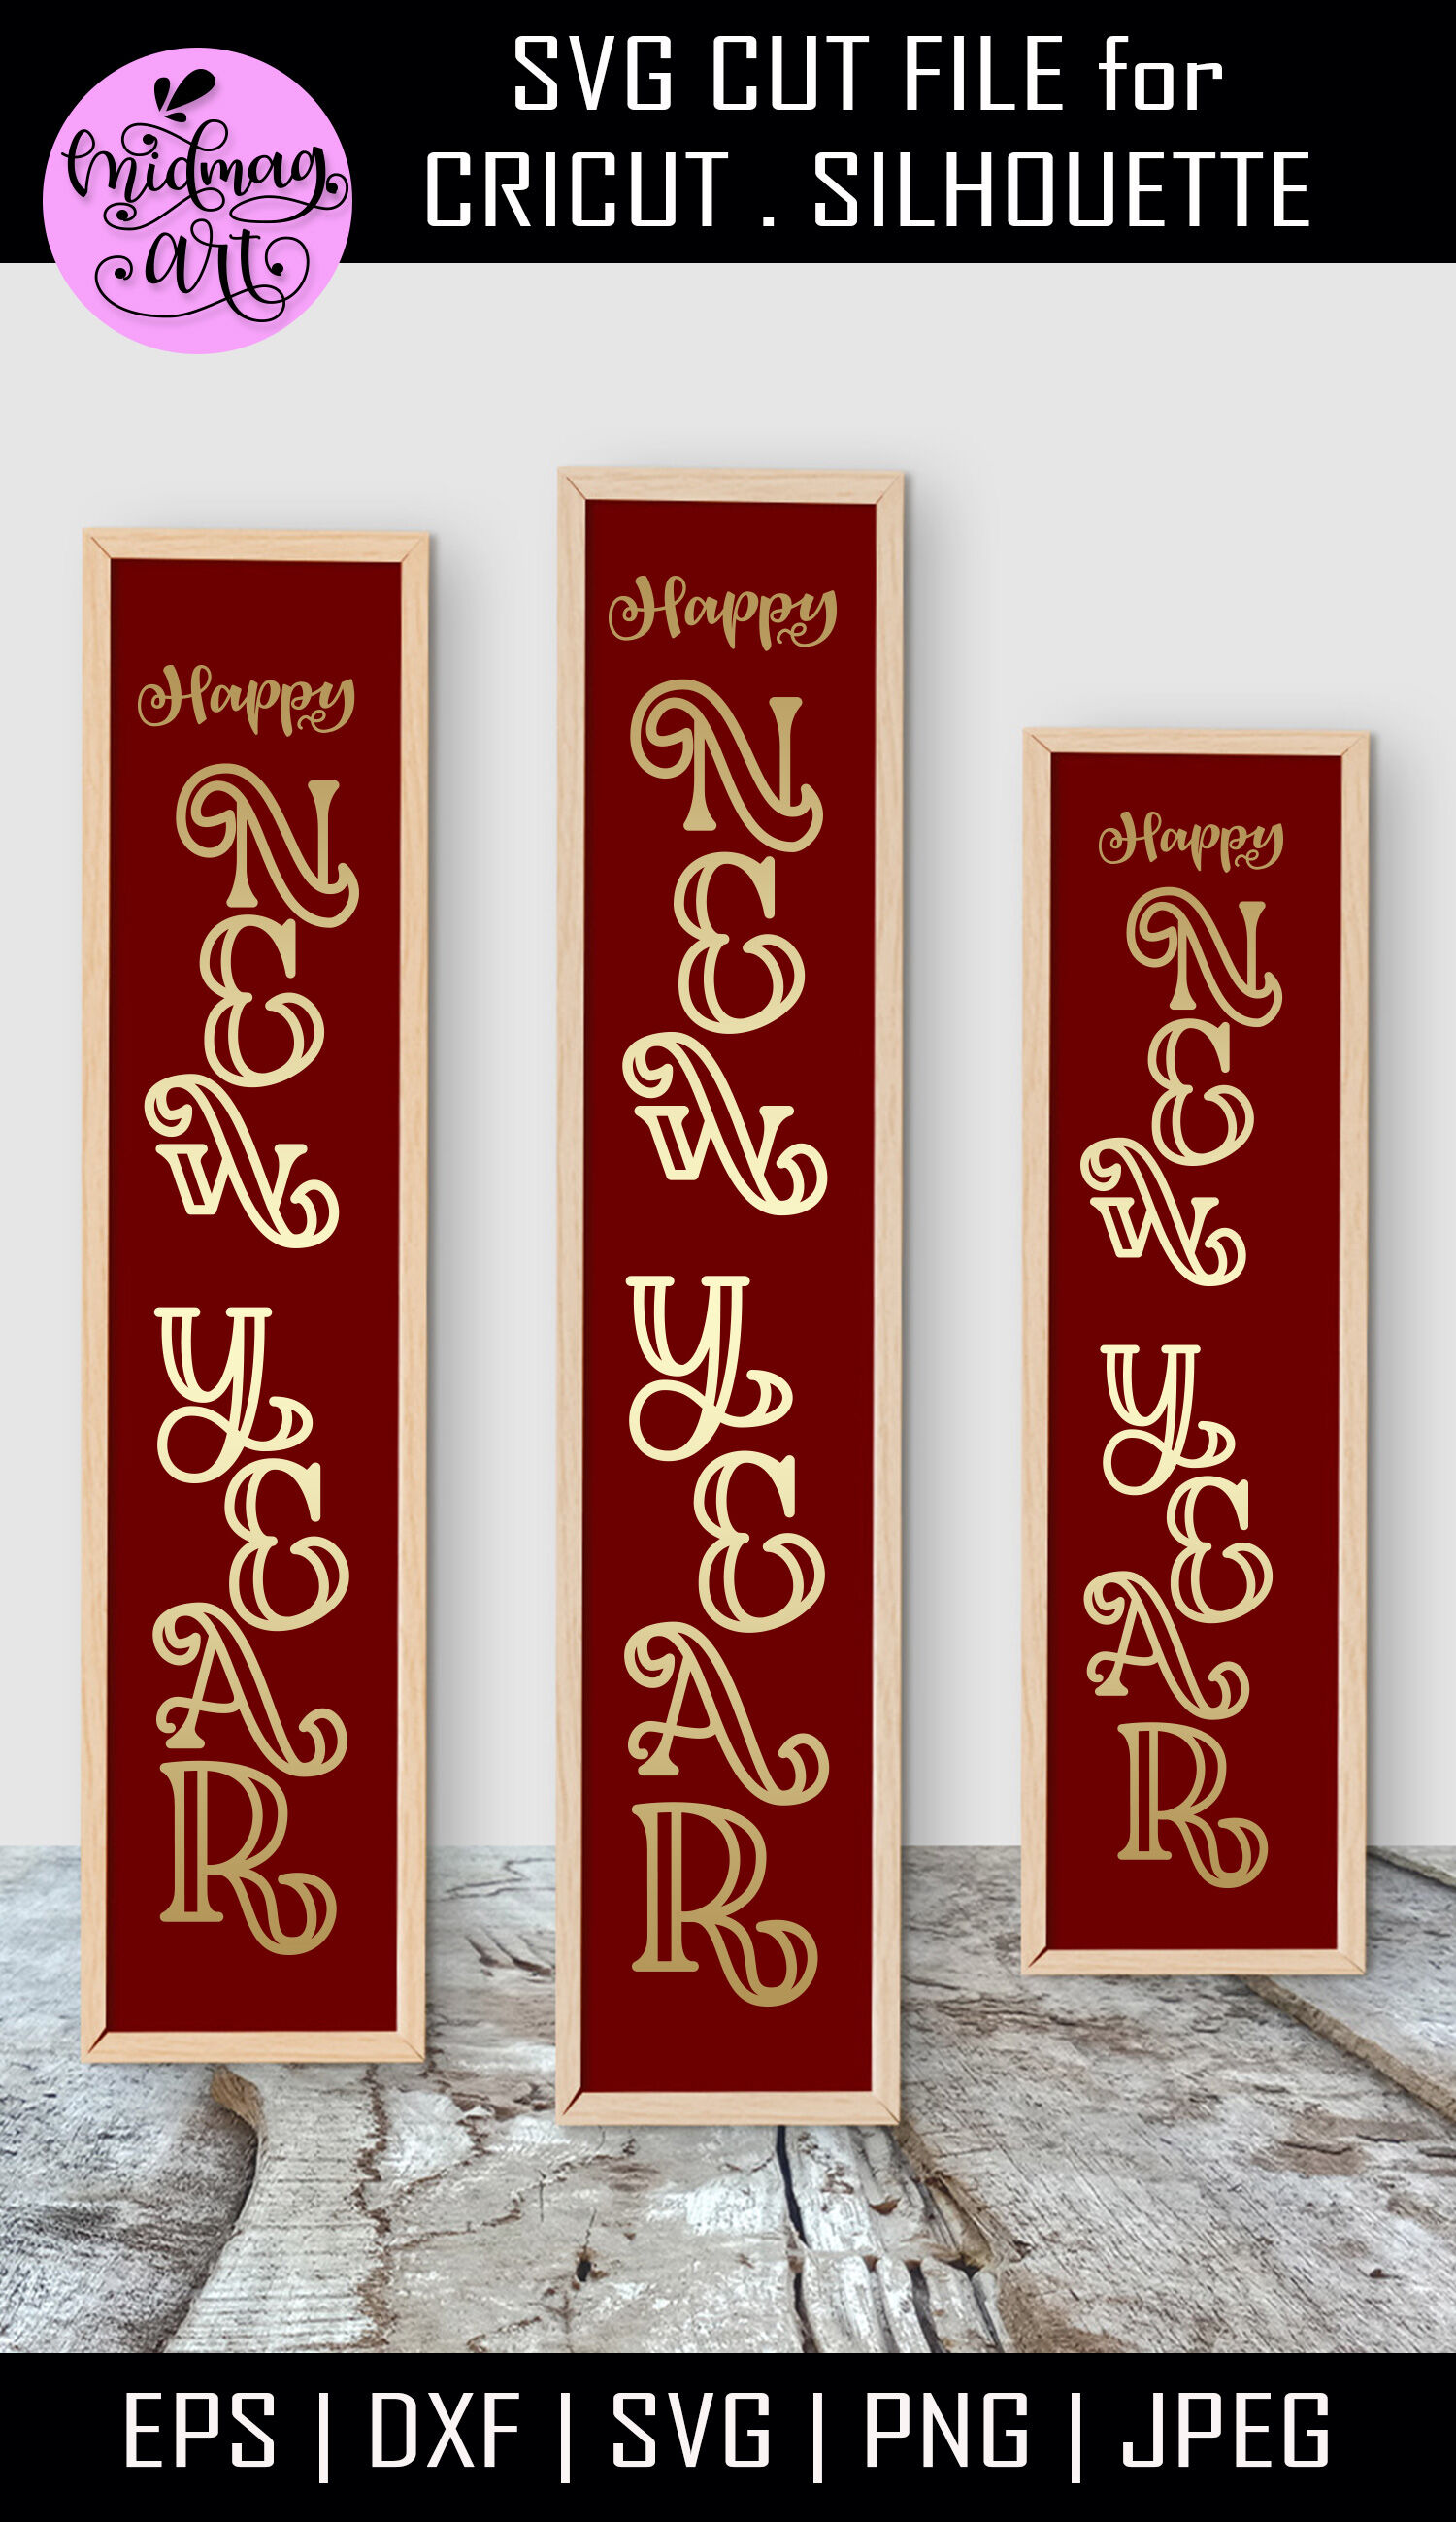 Happy new year porch sign svg, christmas porch sign svg By Midmagart